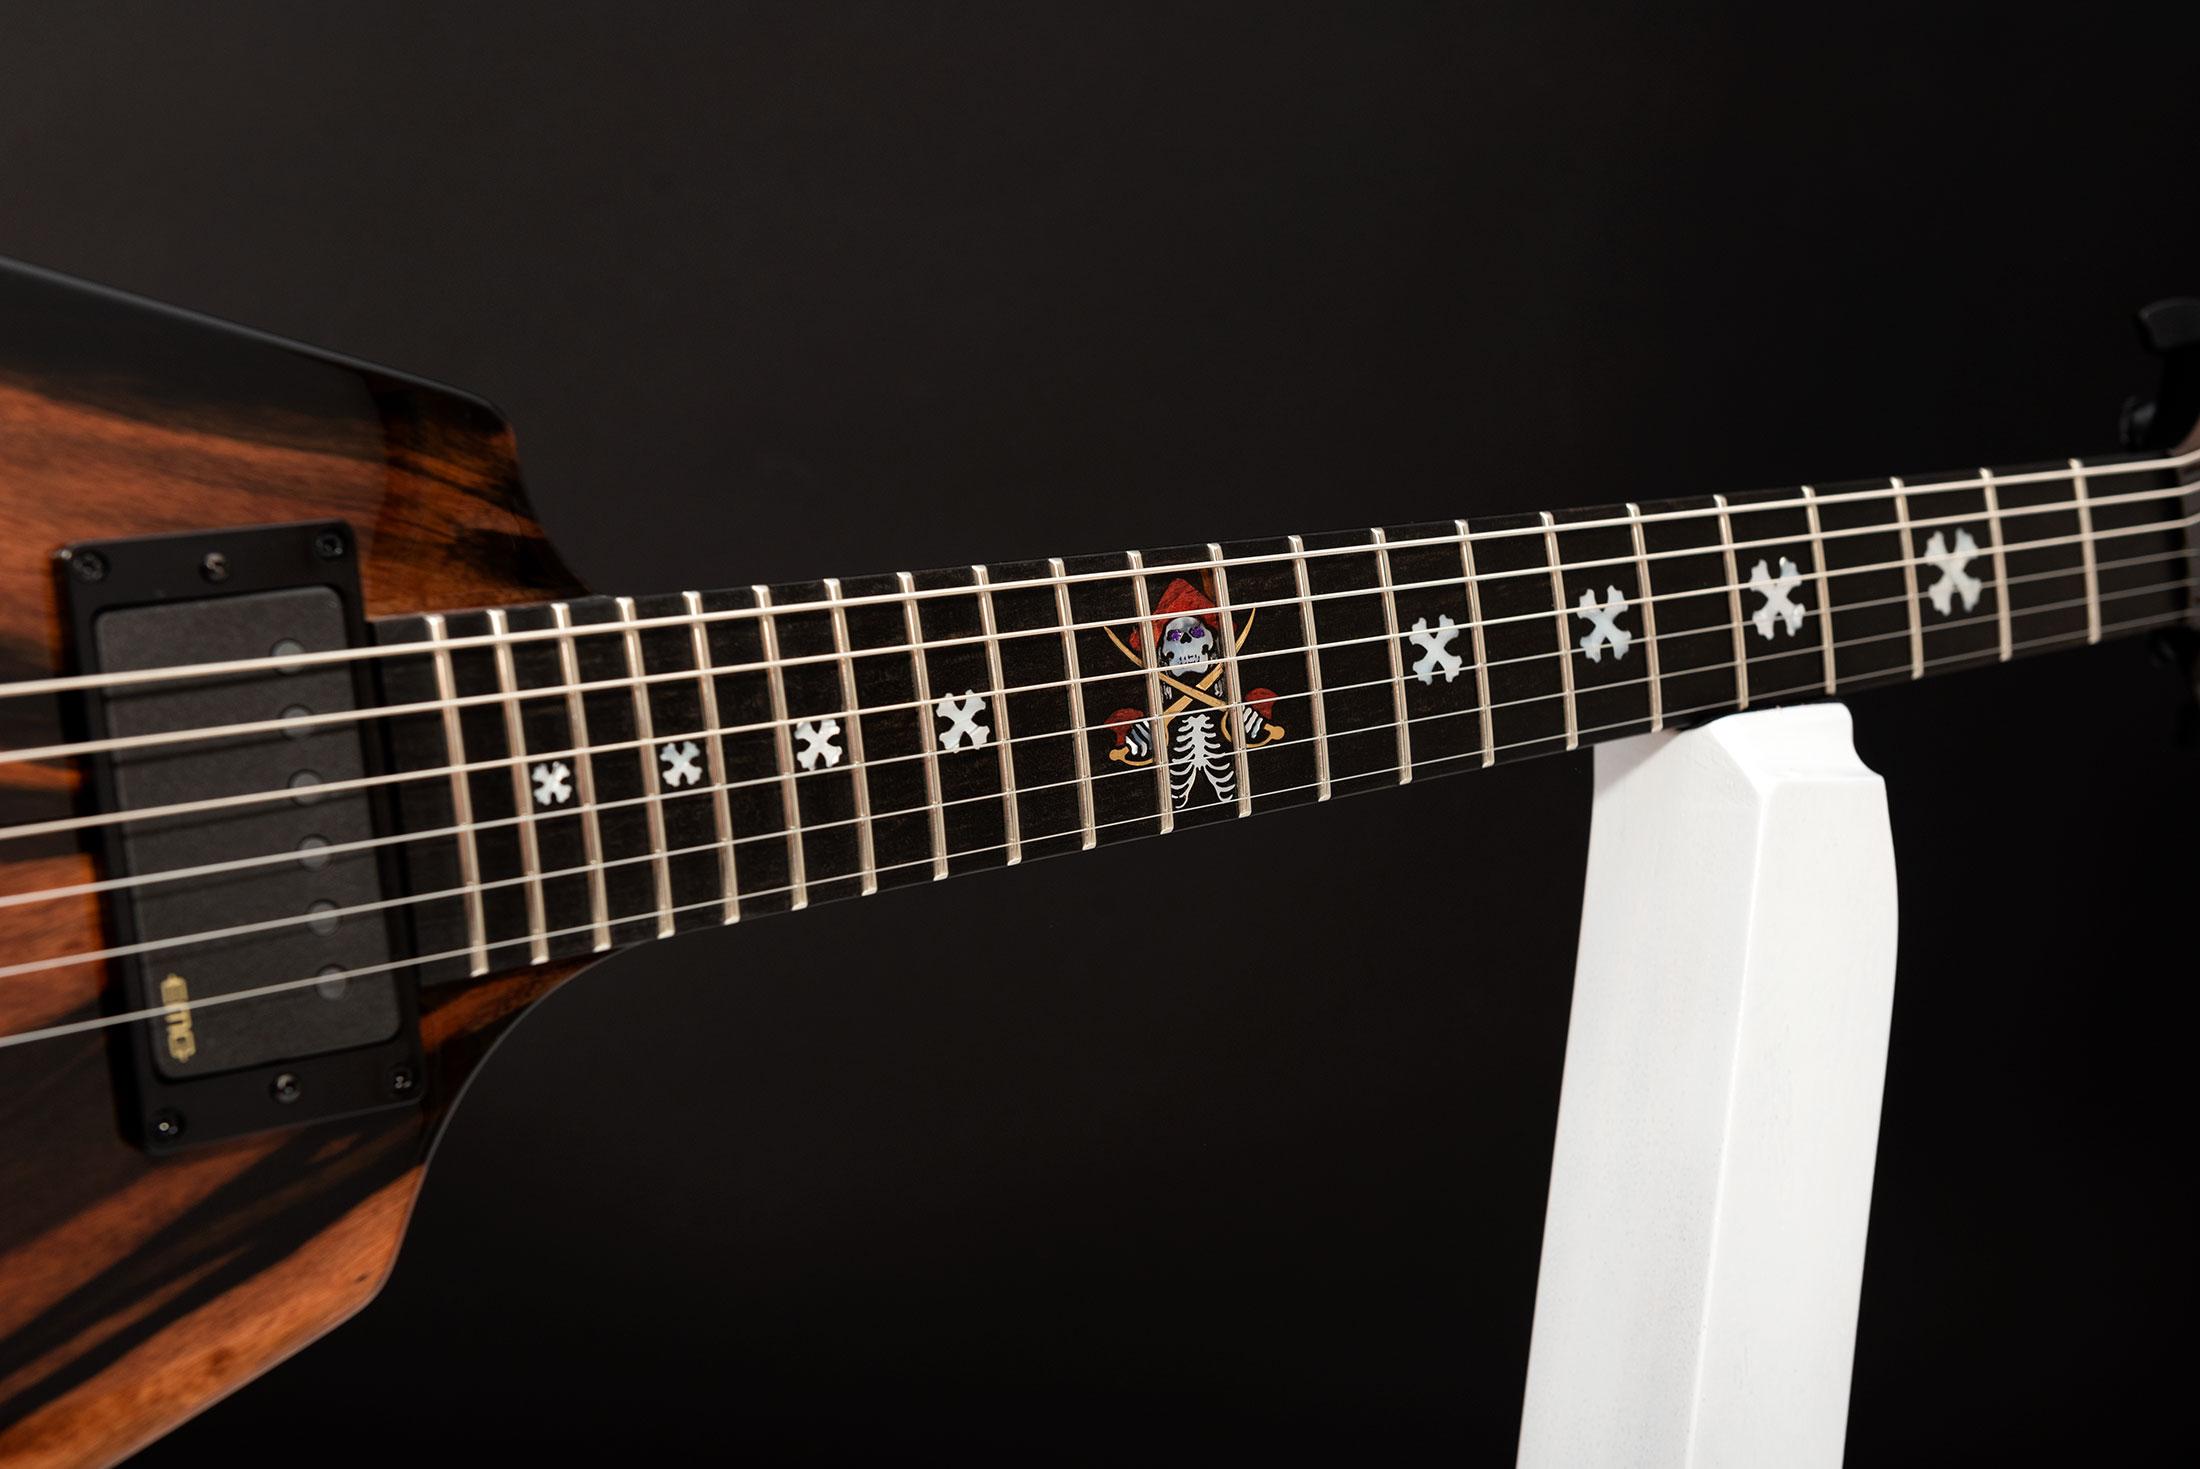 This is a custom guitar, built by a well-known luthier, Augustin Cristian Apostol (@ Avatar2100). Her name is The Serpent.